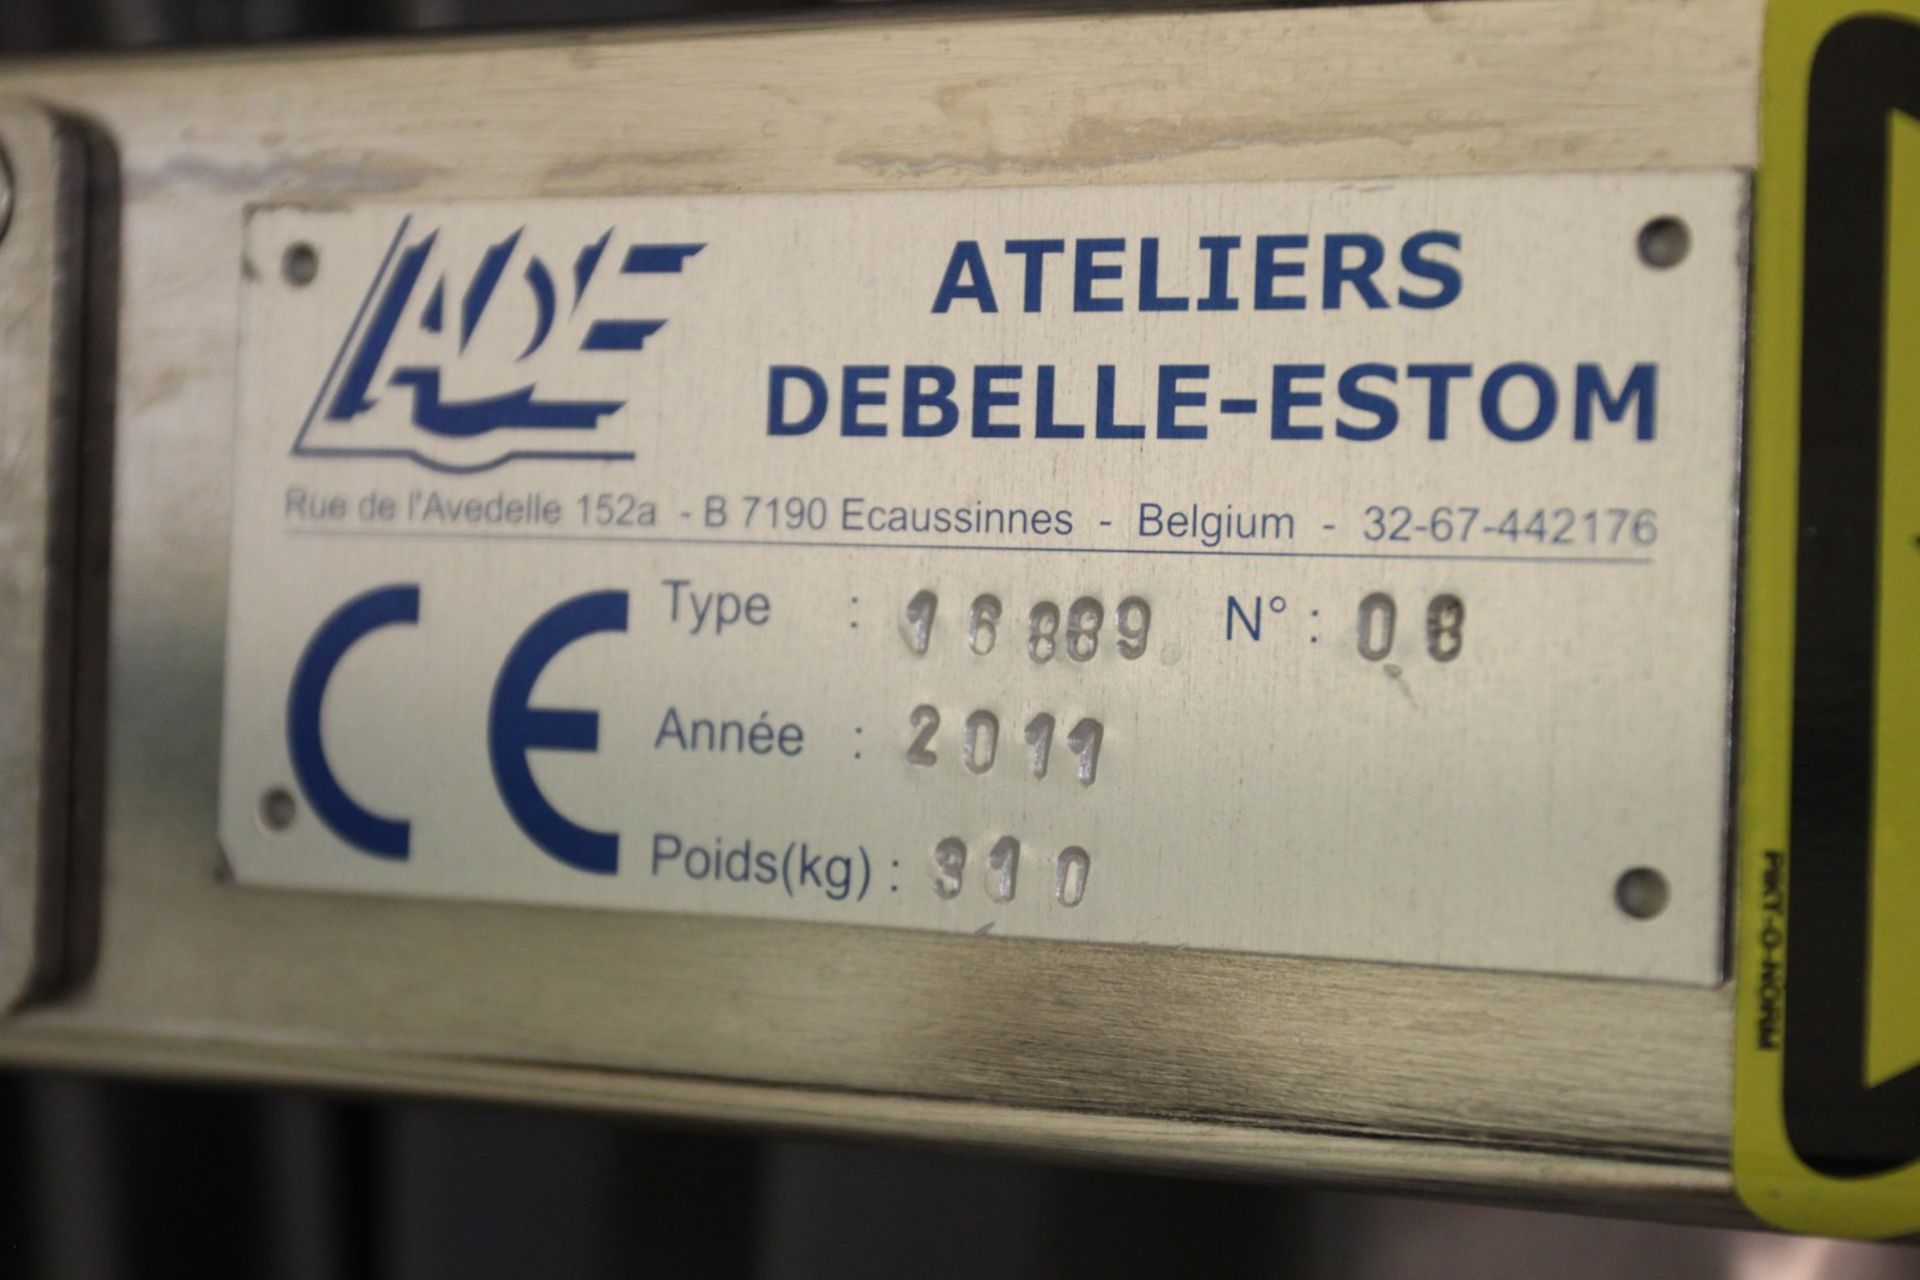 2011 ADE Ateliers Debelle-Estom 16889 Mobile Electric Lift Table, s/n 08 - Image 3 of 3